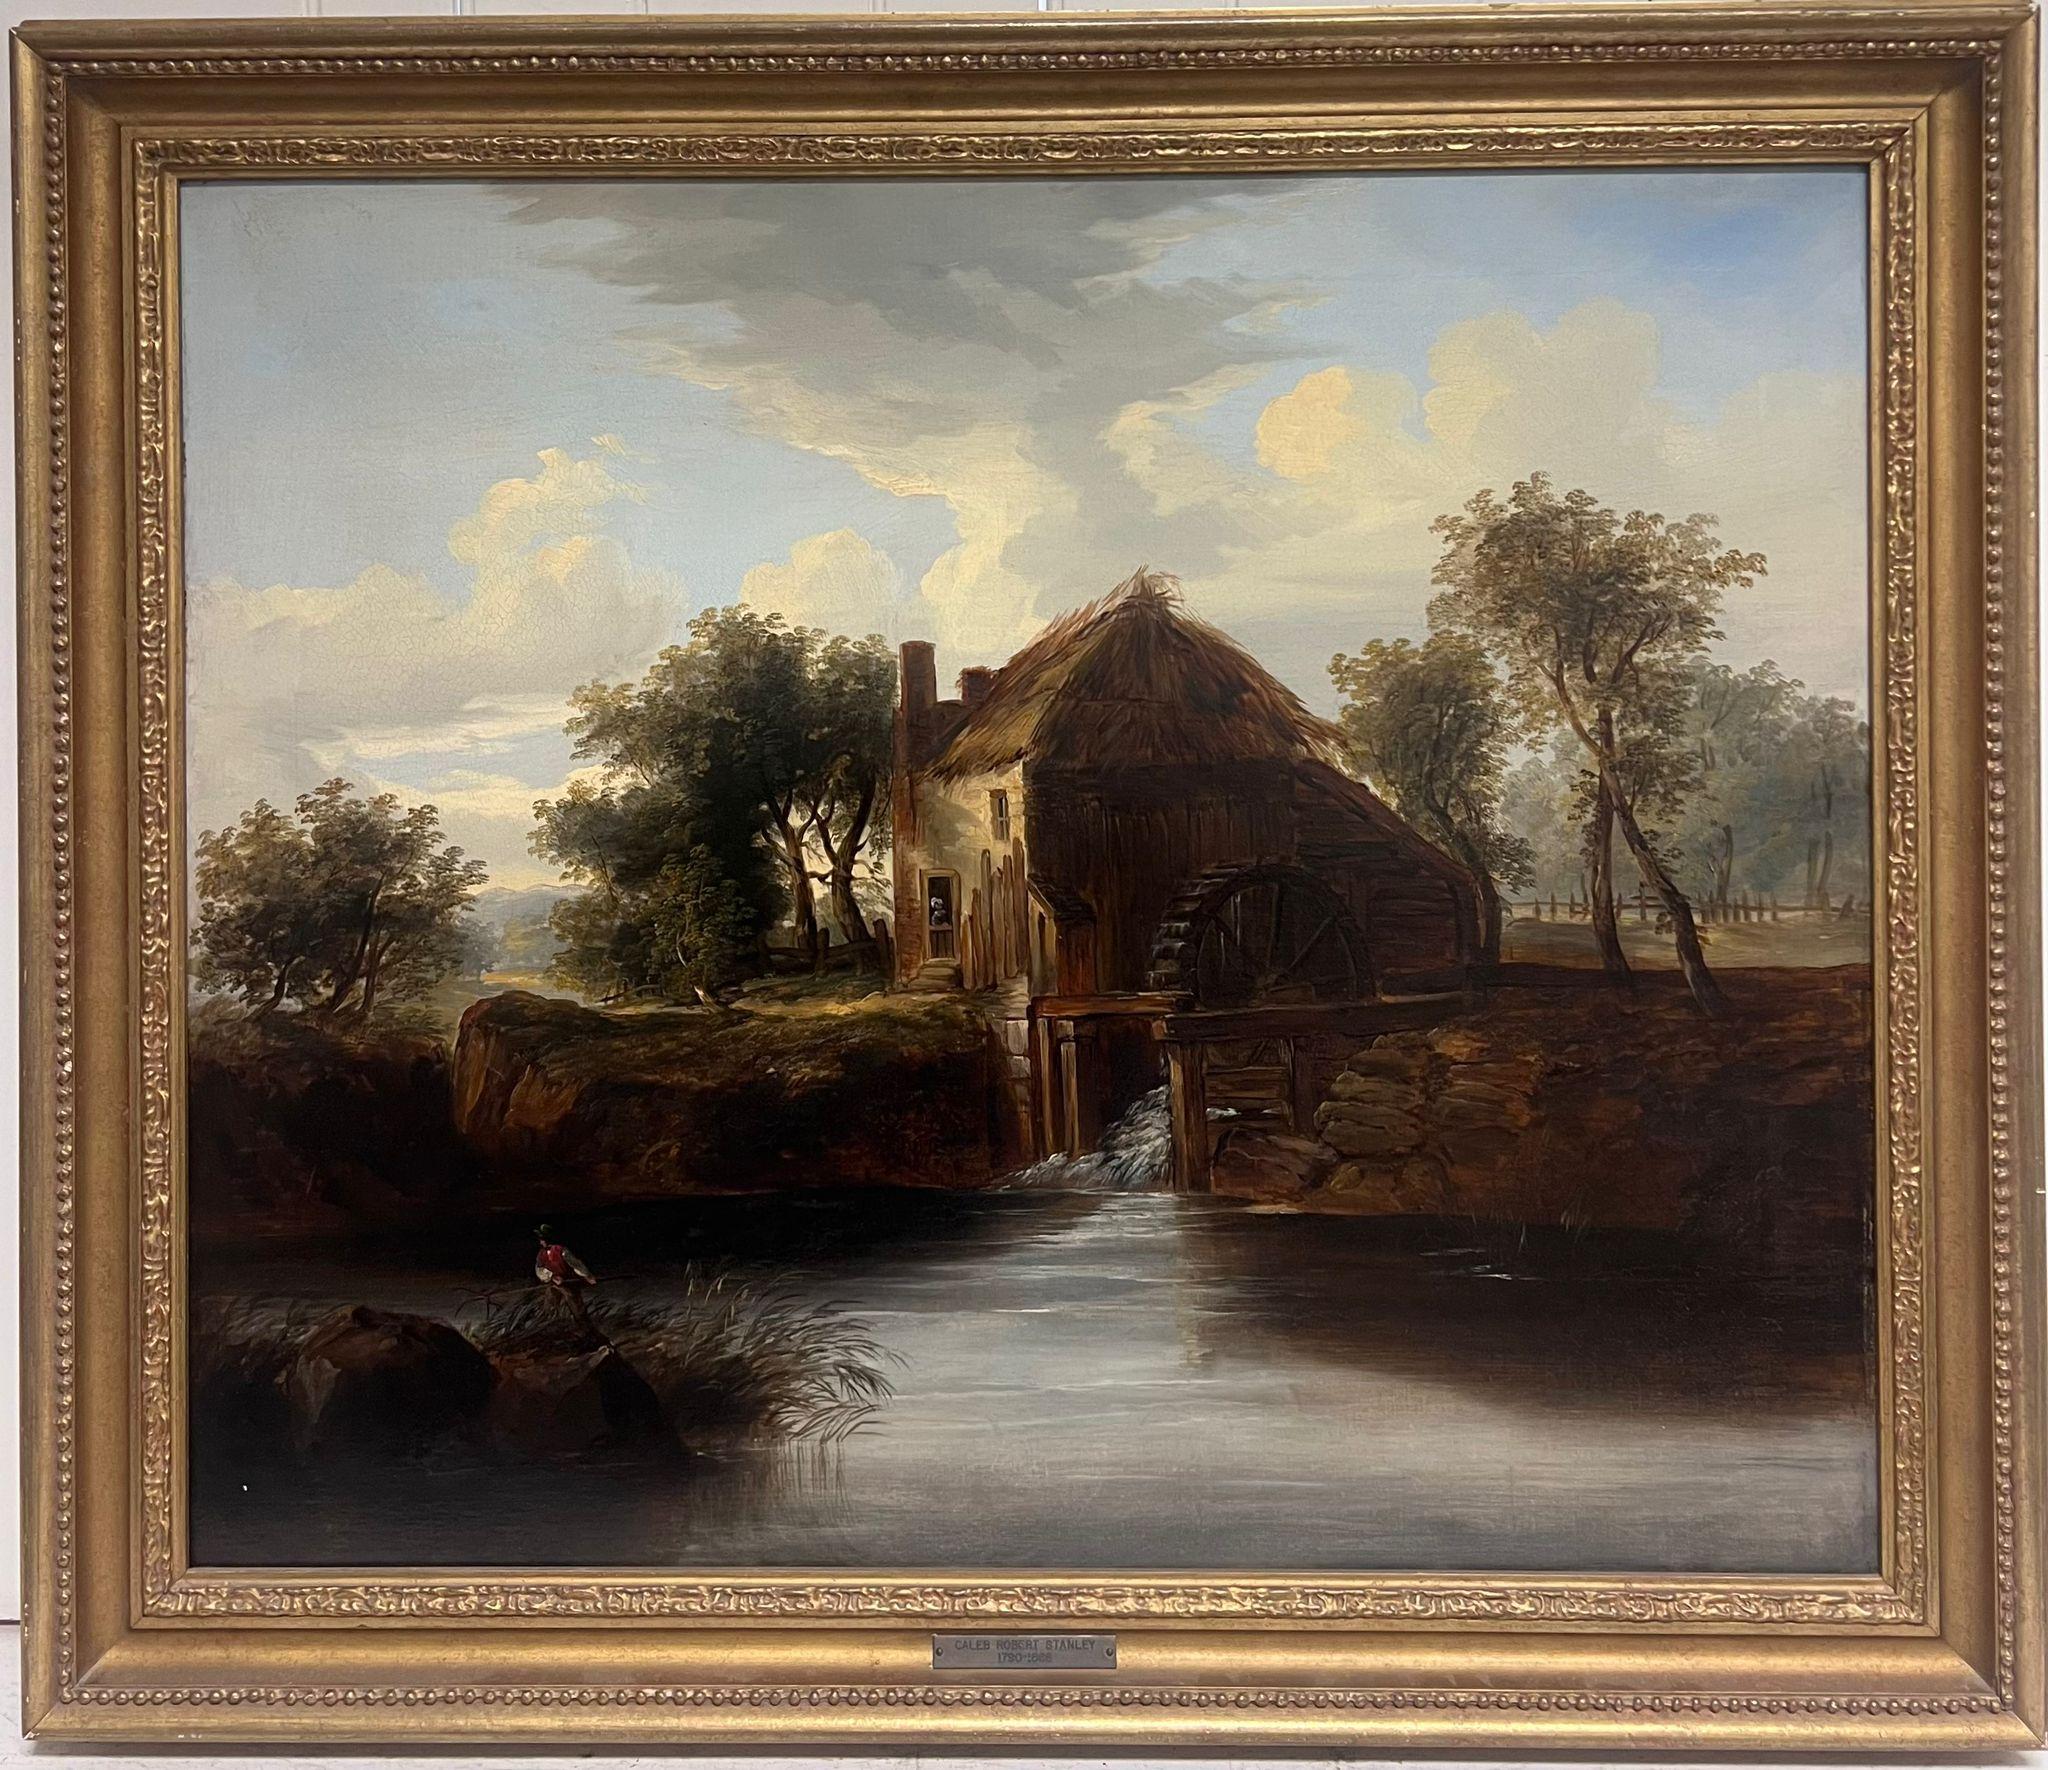 Caleb Robert Stanley Figurative Painting - Mid 19th Century English Landscape Oil Painting The Old Thatched Water Mill